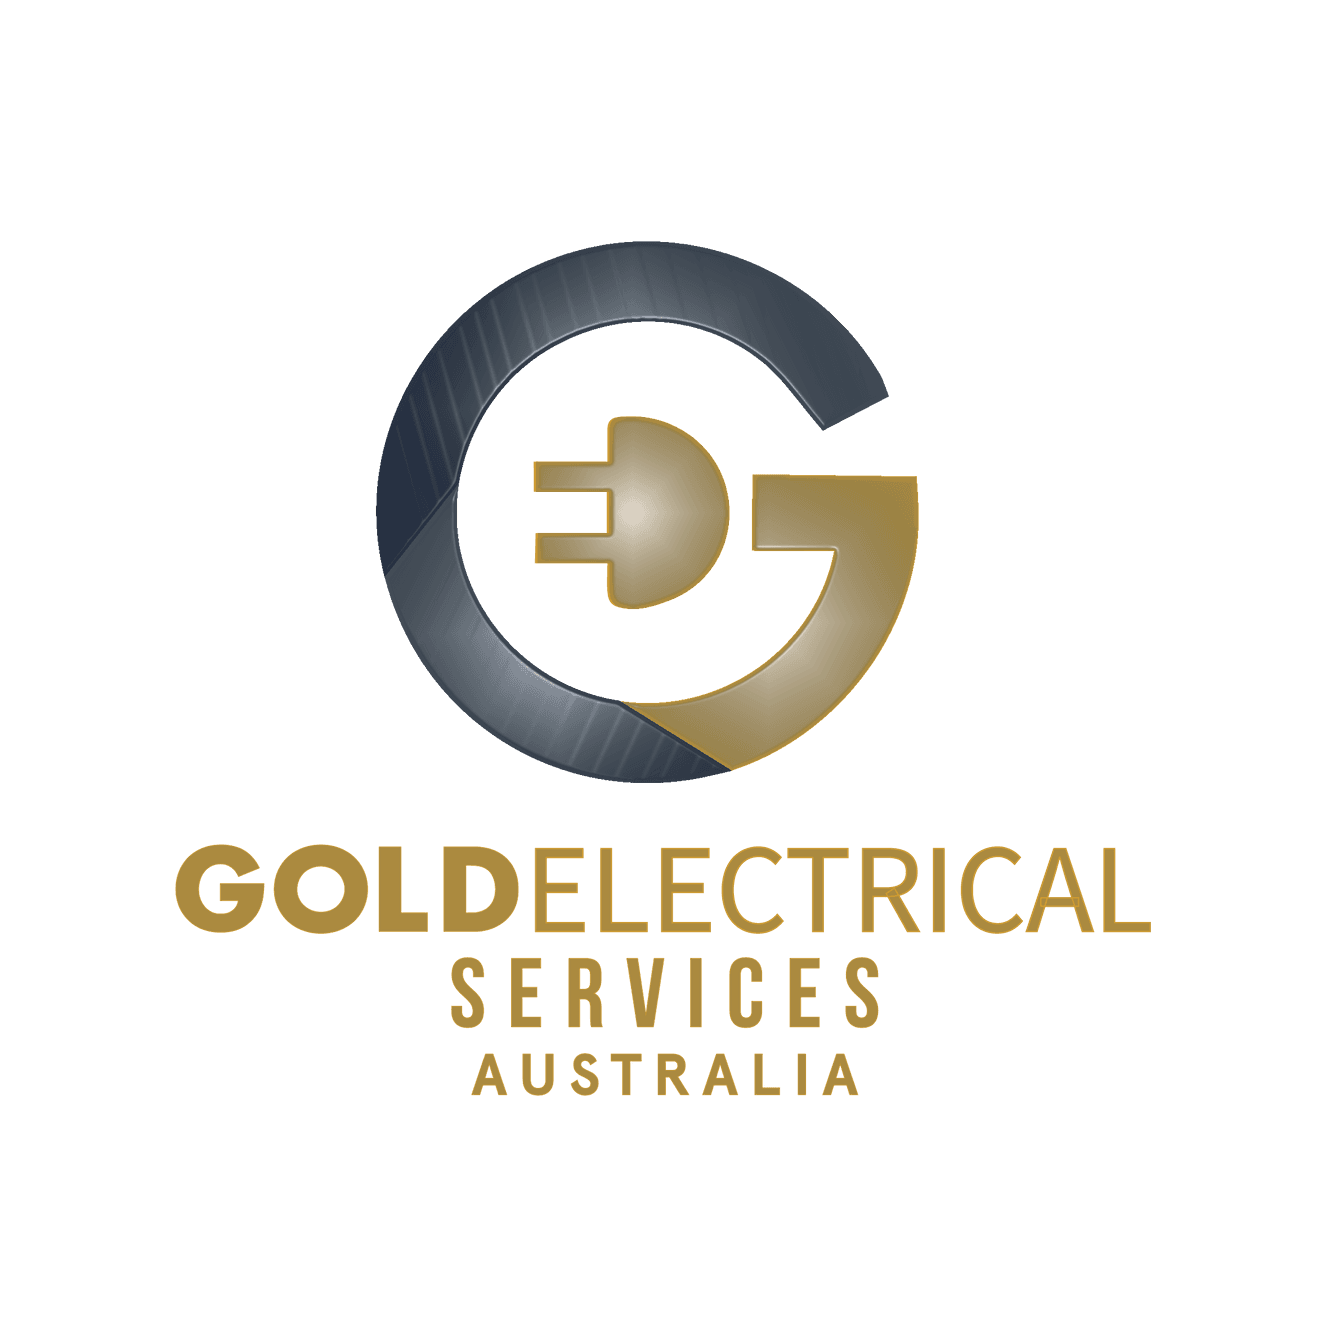 Product Services | Gold Electrical Services Australia Pty Ltd image